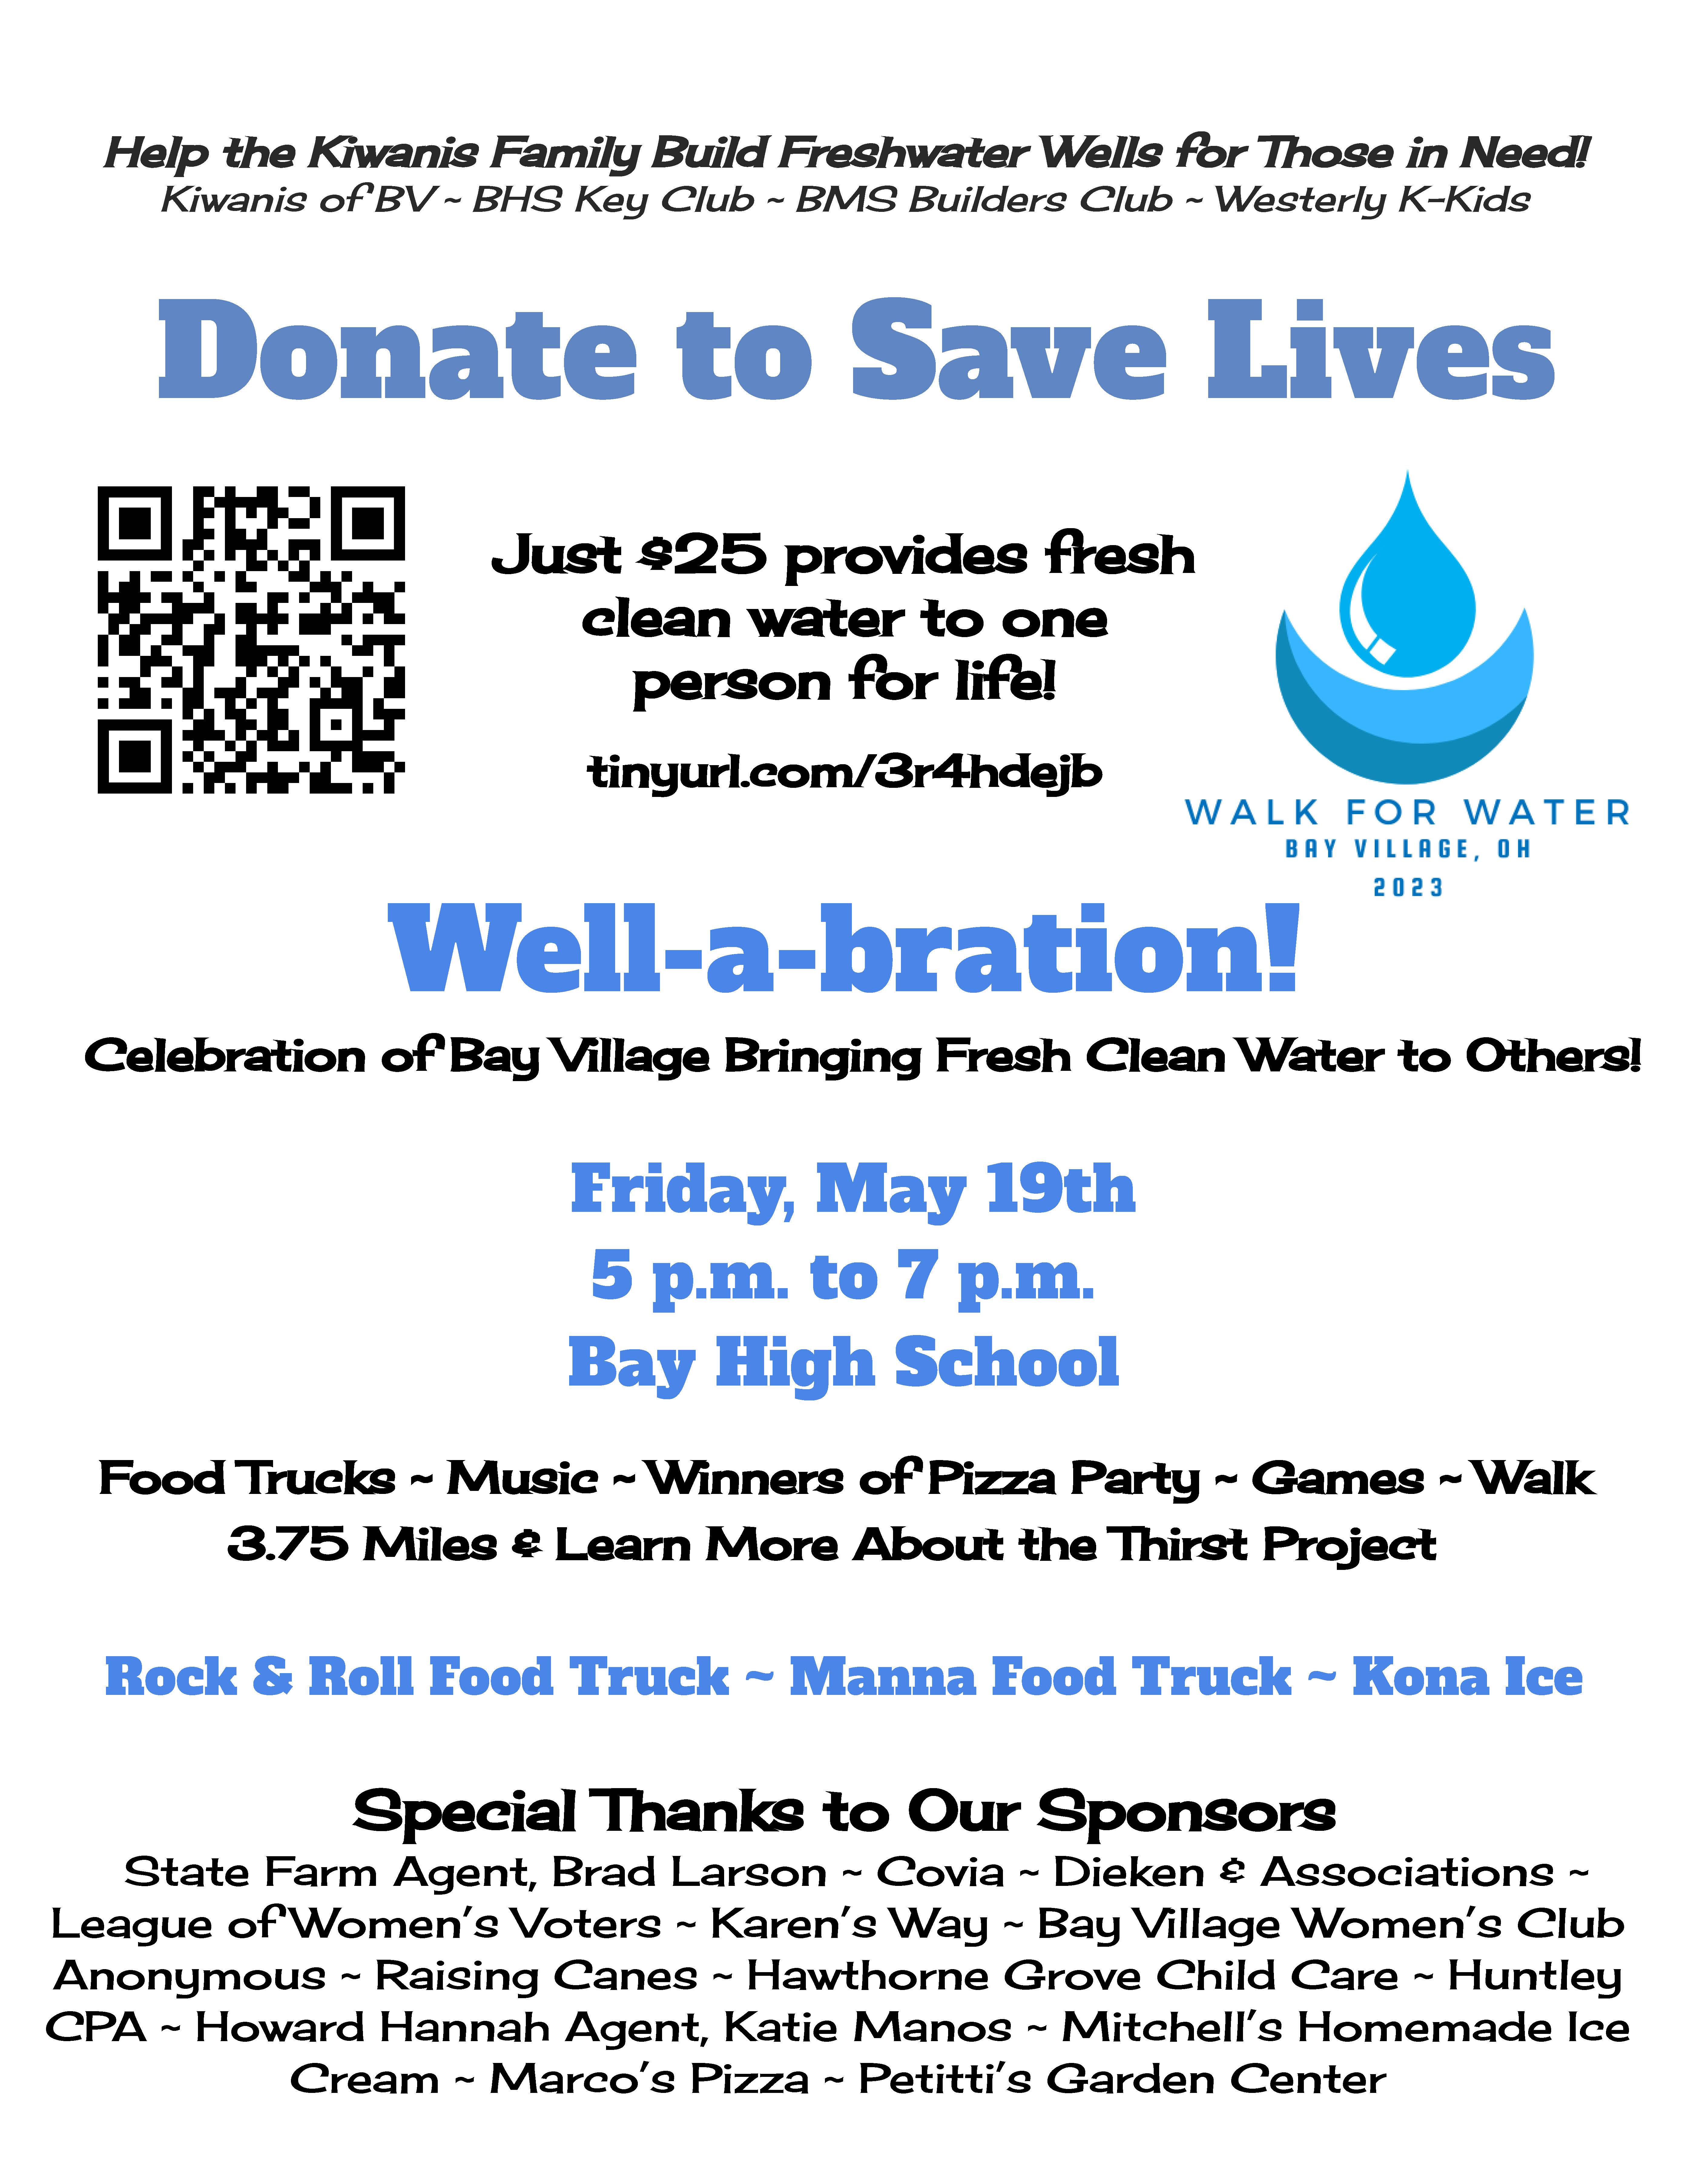 Walk for Water May 19 event flyer